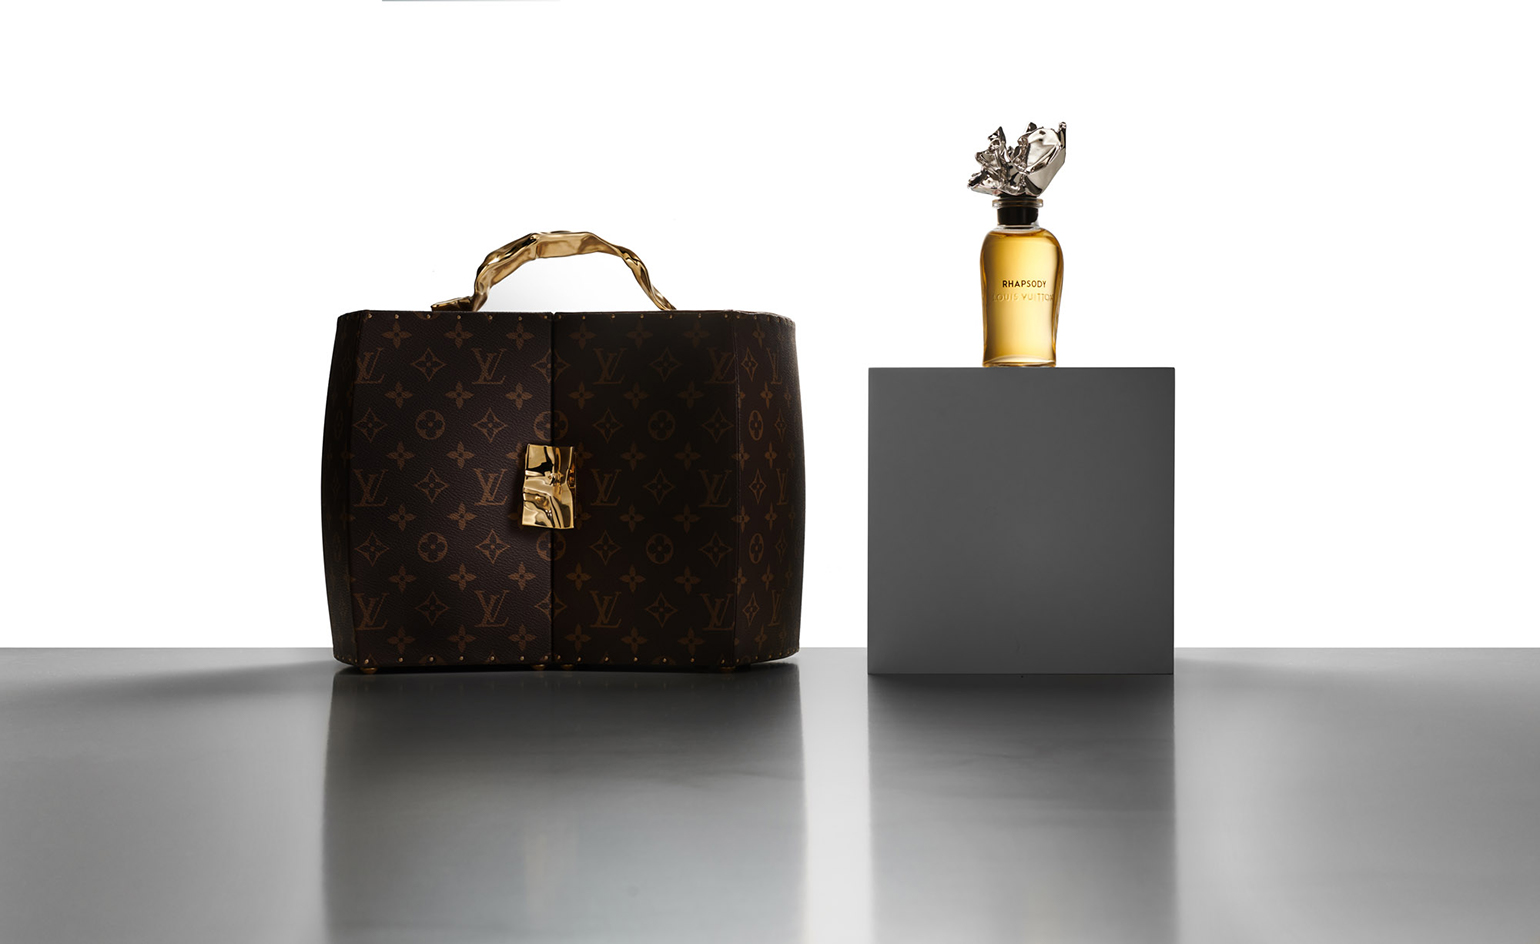 Frank Gehry and Louis Vuitton perfume collaboration